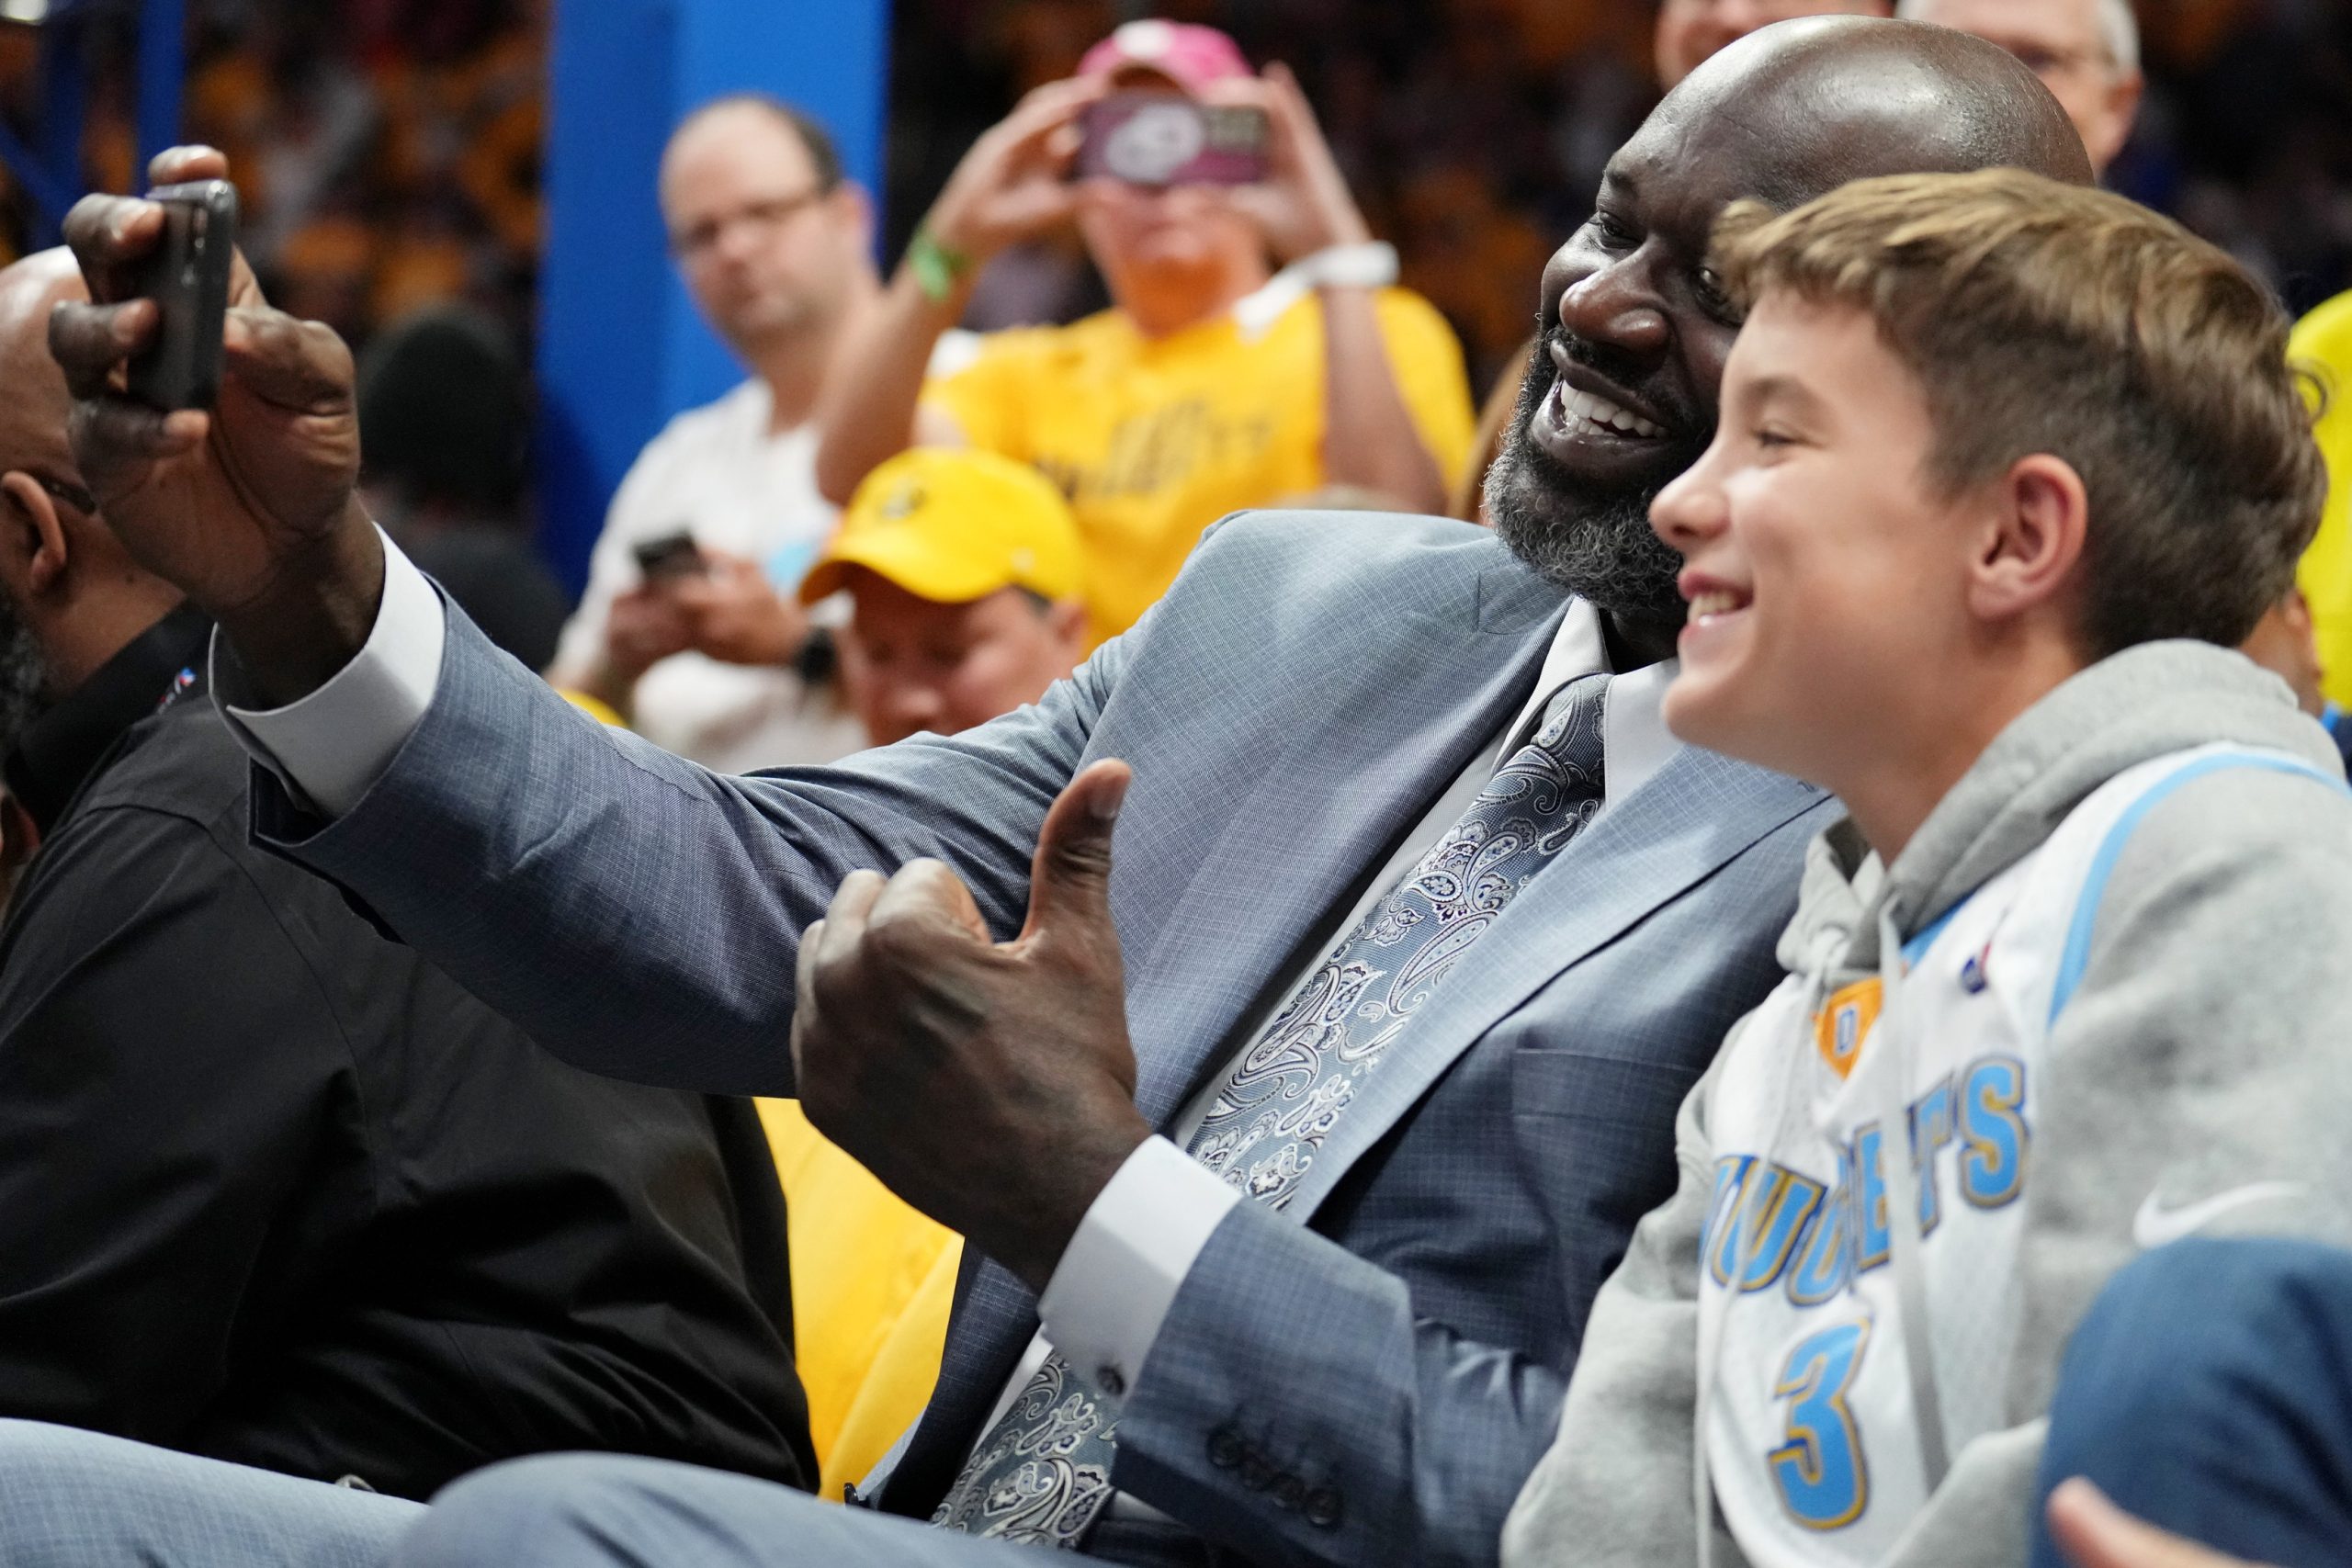 The Top 10 SEC Men's Basketball:Jun 1, 2023; Denver, CO, USA; NBA former player Shaquille O'Neill takes a selfie with Marshall Manning, son of Peyton Manning (not pictured) before game one of the 2023 NBA Finals between the Miami Heat and Denver Nuggets at Ball Arena. Mandatory Credit: Kyle Terada-USA TODAY Sports